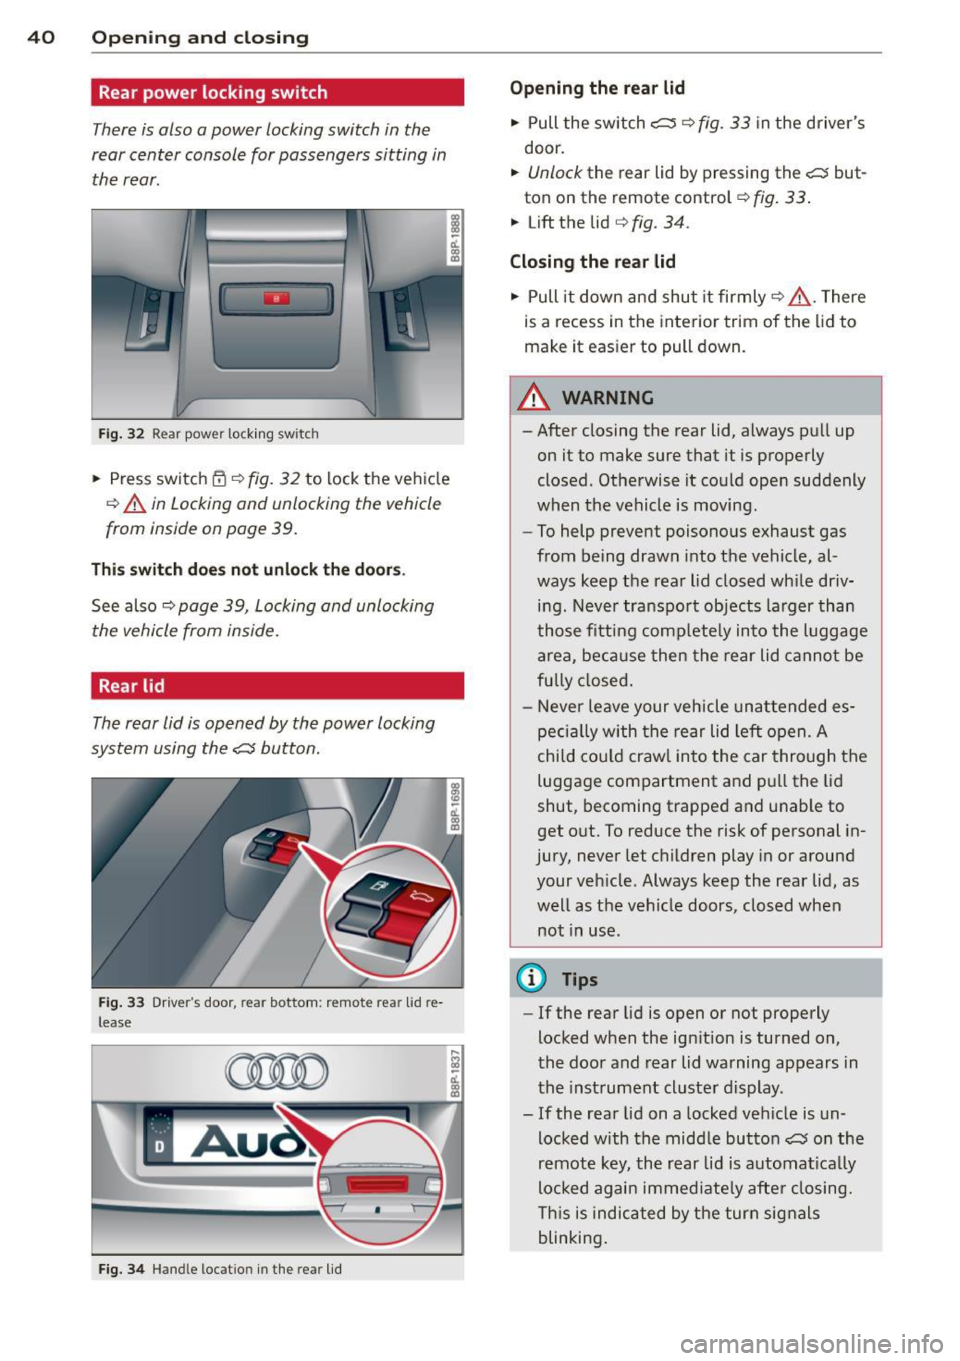 AUDI A3 2012  Owner´s Manual 40  Opening  and closing 
Rear power  locking switch 
There is also  a power  locking switch  in the 
rear center  console  for passengers  sitting  in 
the  rear. 
Fig. 32 Rear power  locking switch 